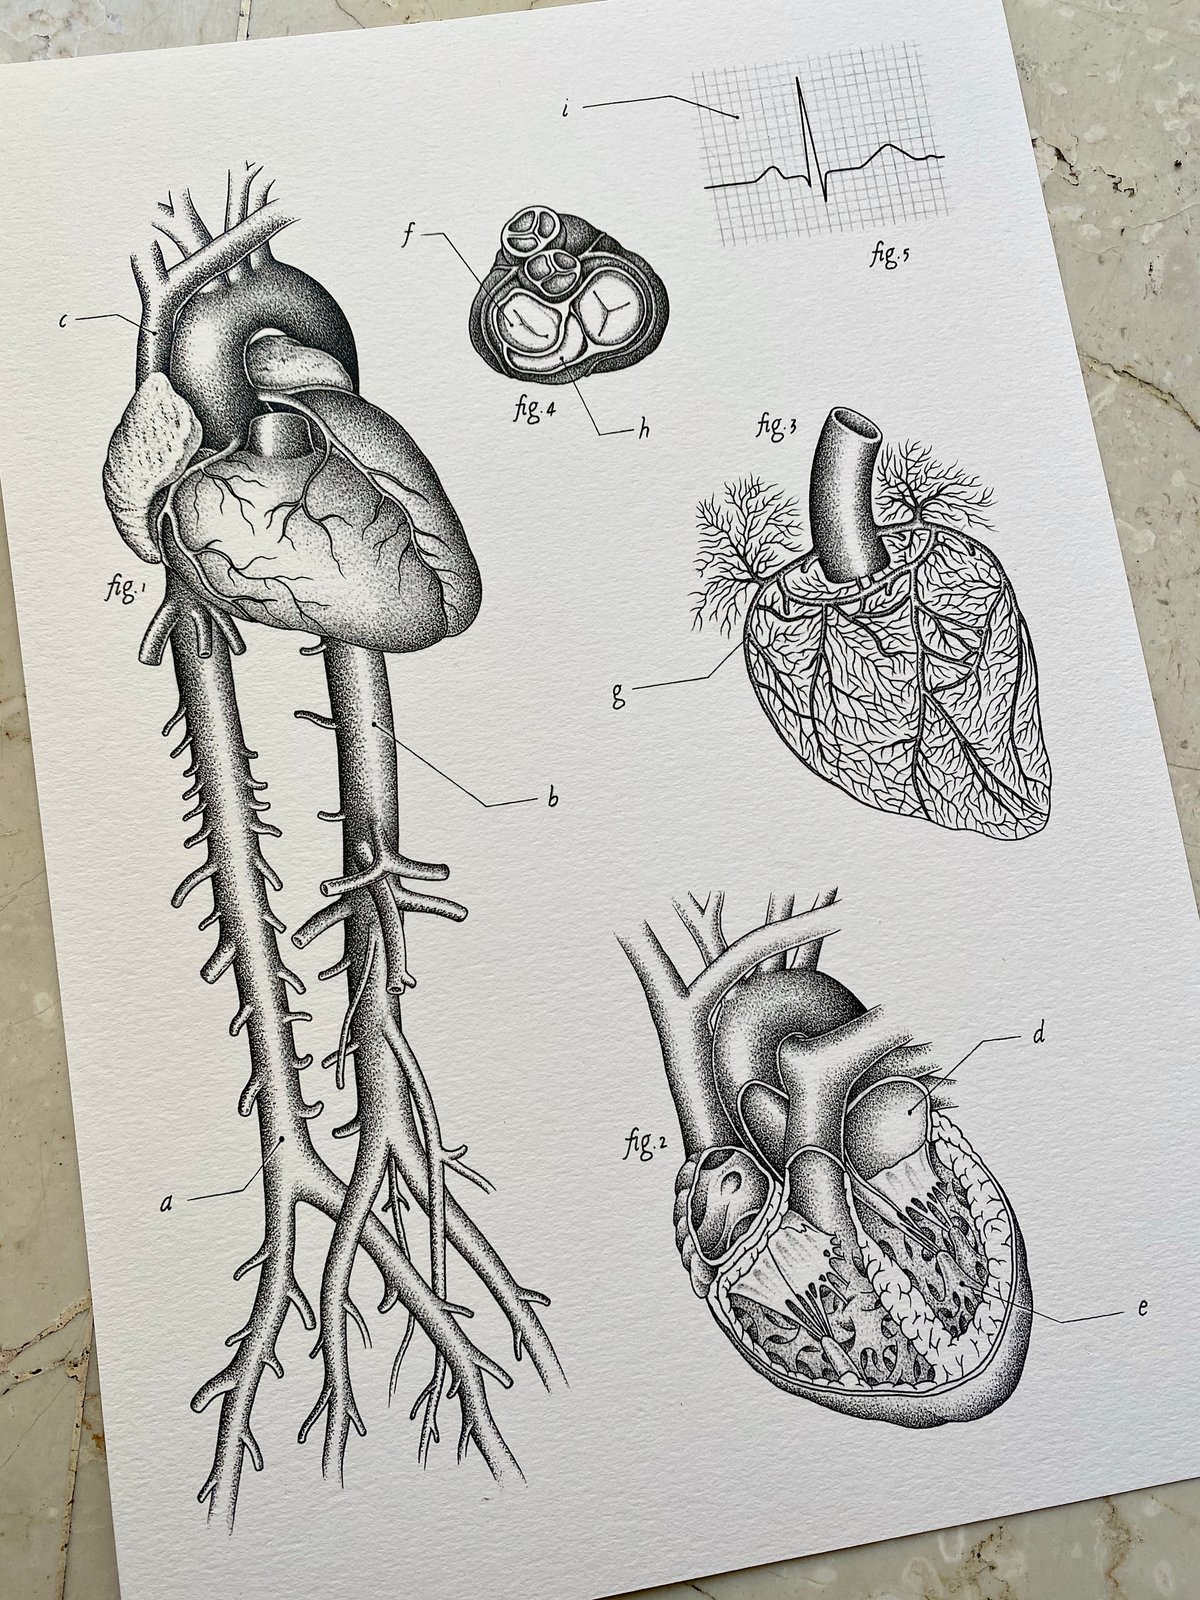 (A3/A4 SIZE) HEART-THEMED ANATOMICAL PLATE